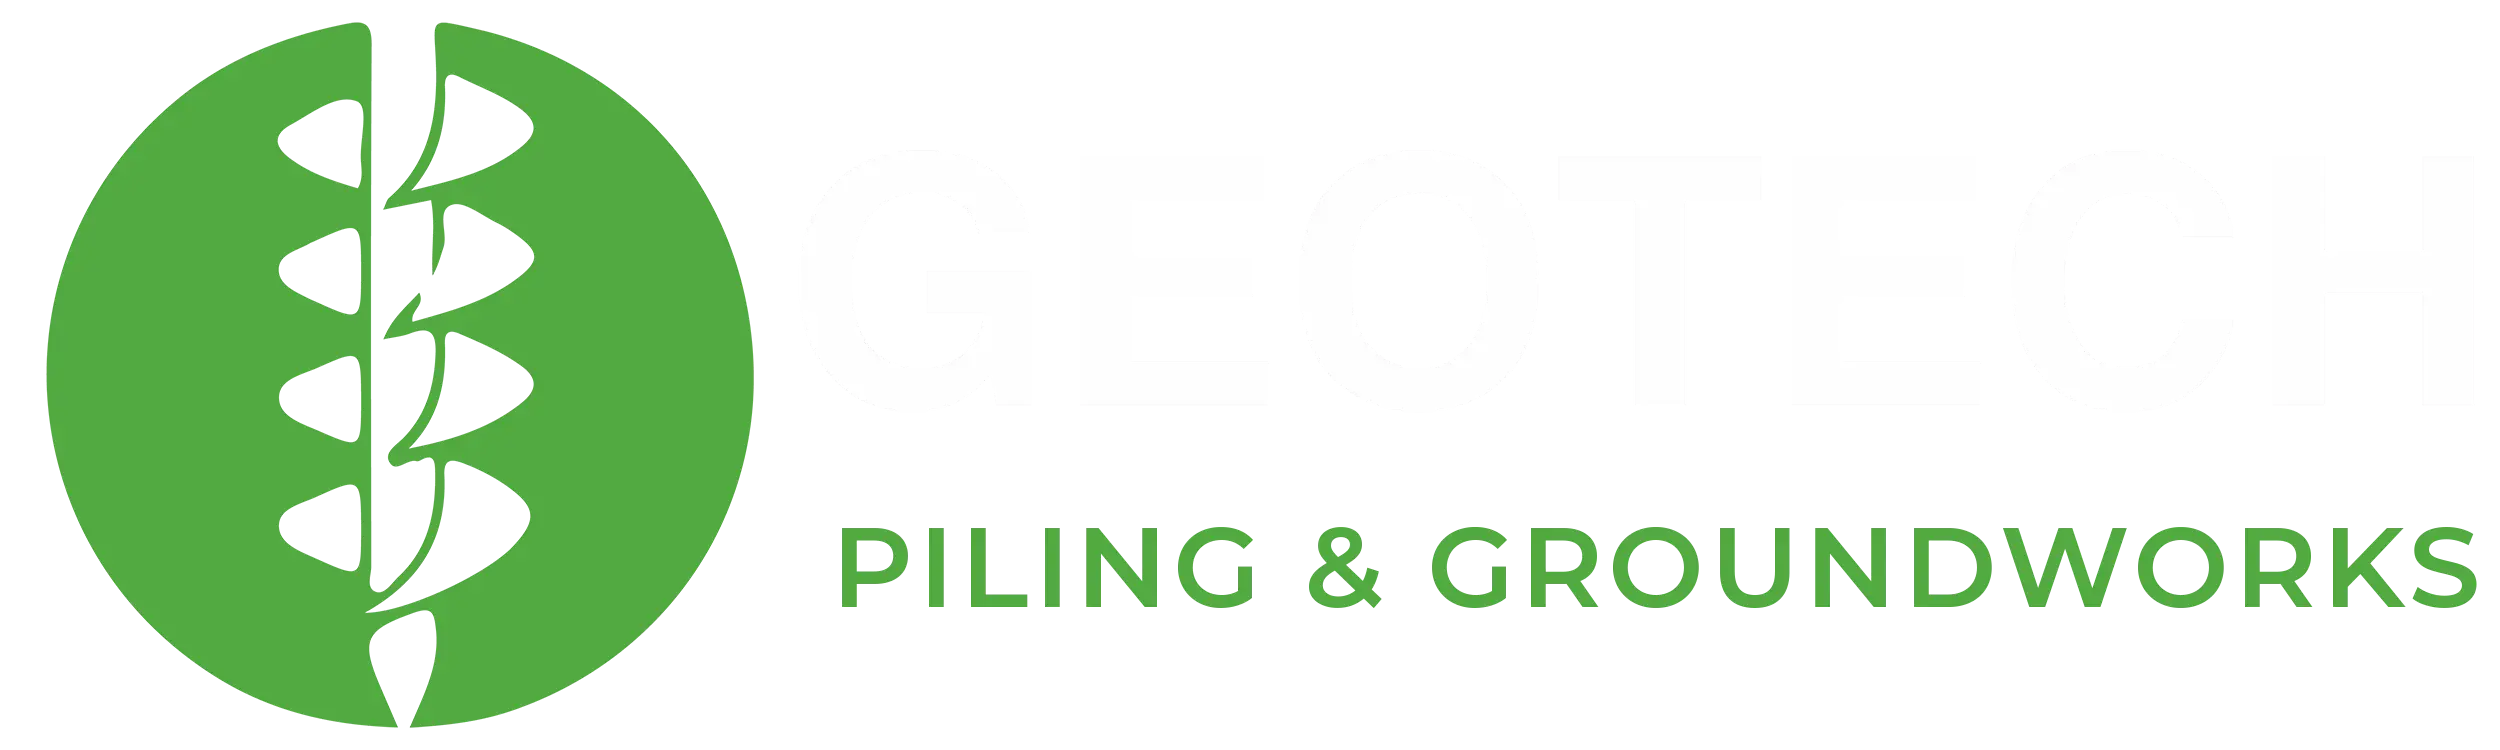 Geotech Piling